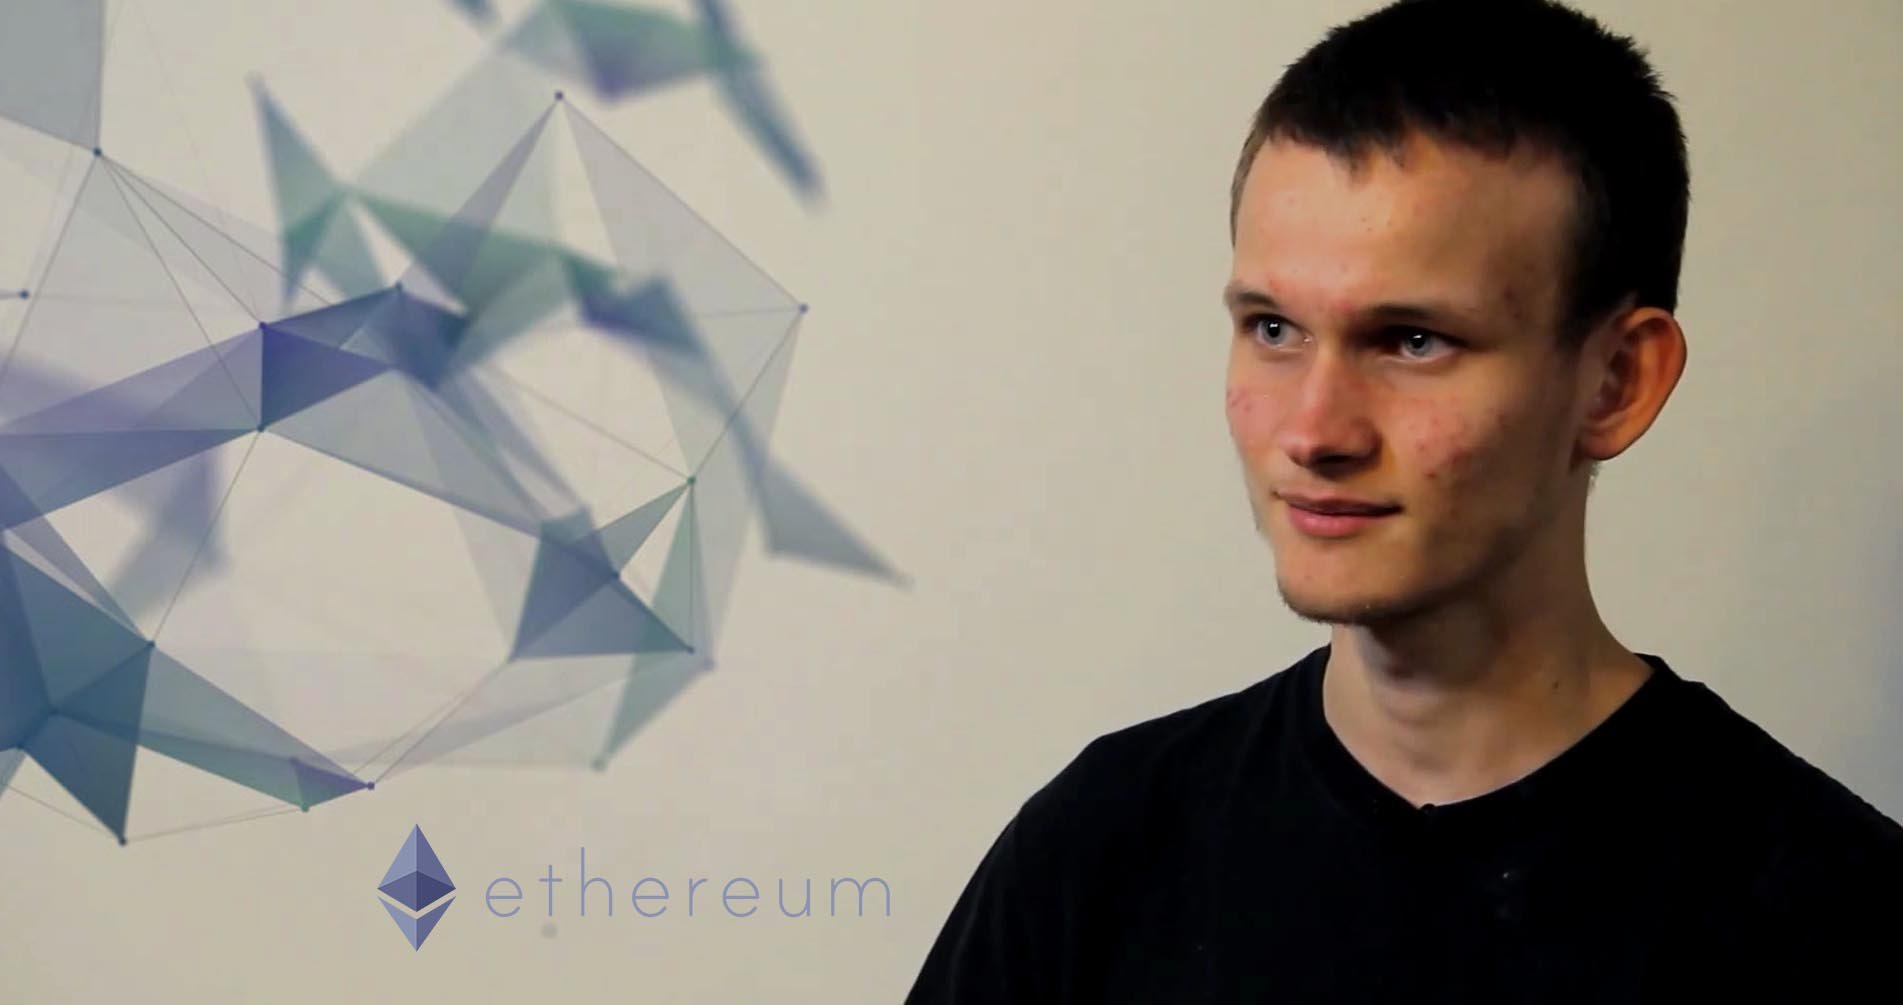 Vitalik Buterin: Ethereum's Price Rise Increases Our Sovereignty